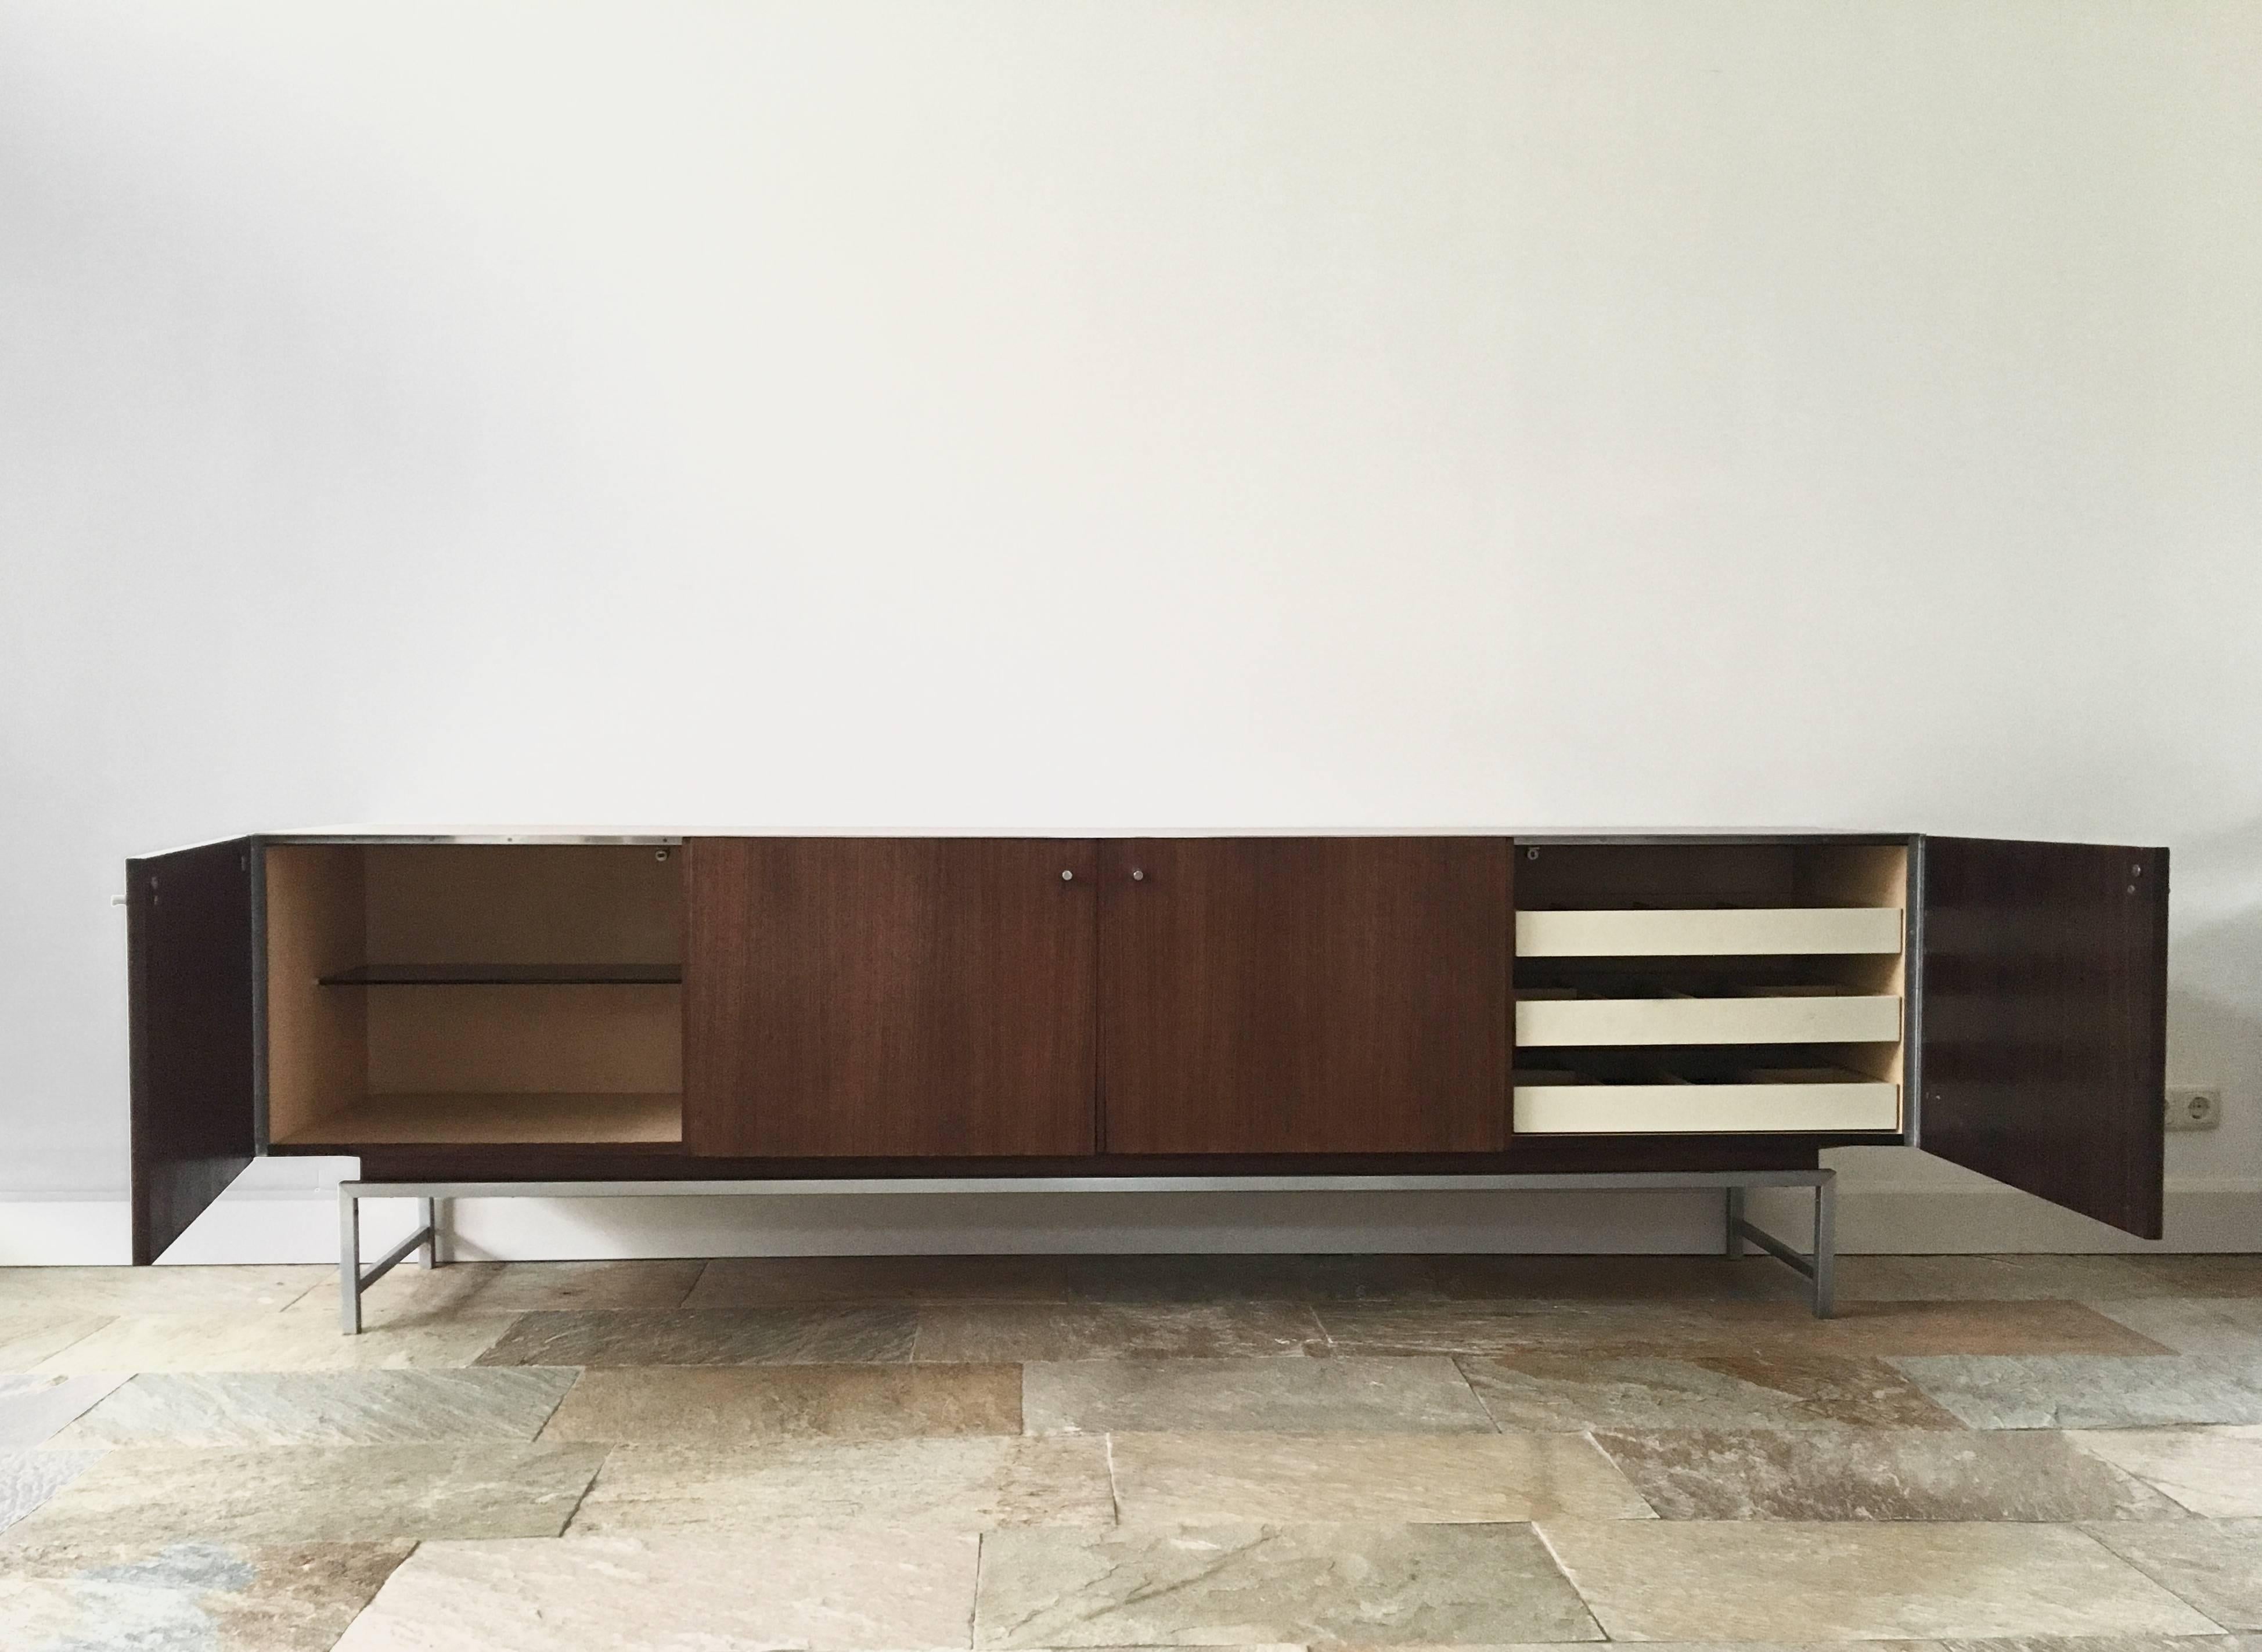 This sideboard (VDJ-245) was manufactured by Fristho Franeker in The Netherlands in the 1960s. It was designed by Kurt Gunther and Horst Brechtmann in 1961. This dresser is made from Indian palissander / Rosewood with a metal frame, and It also